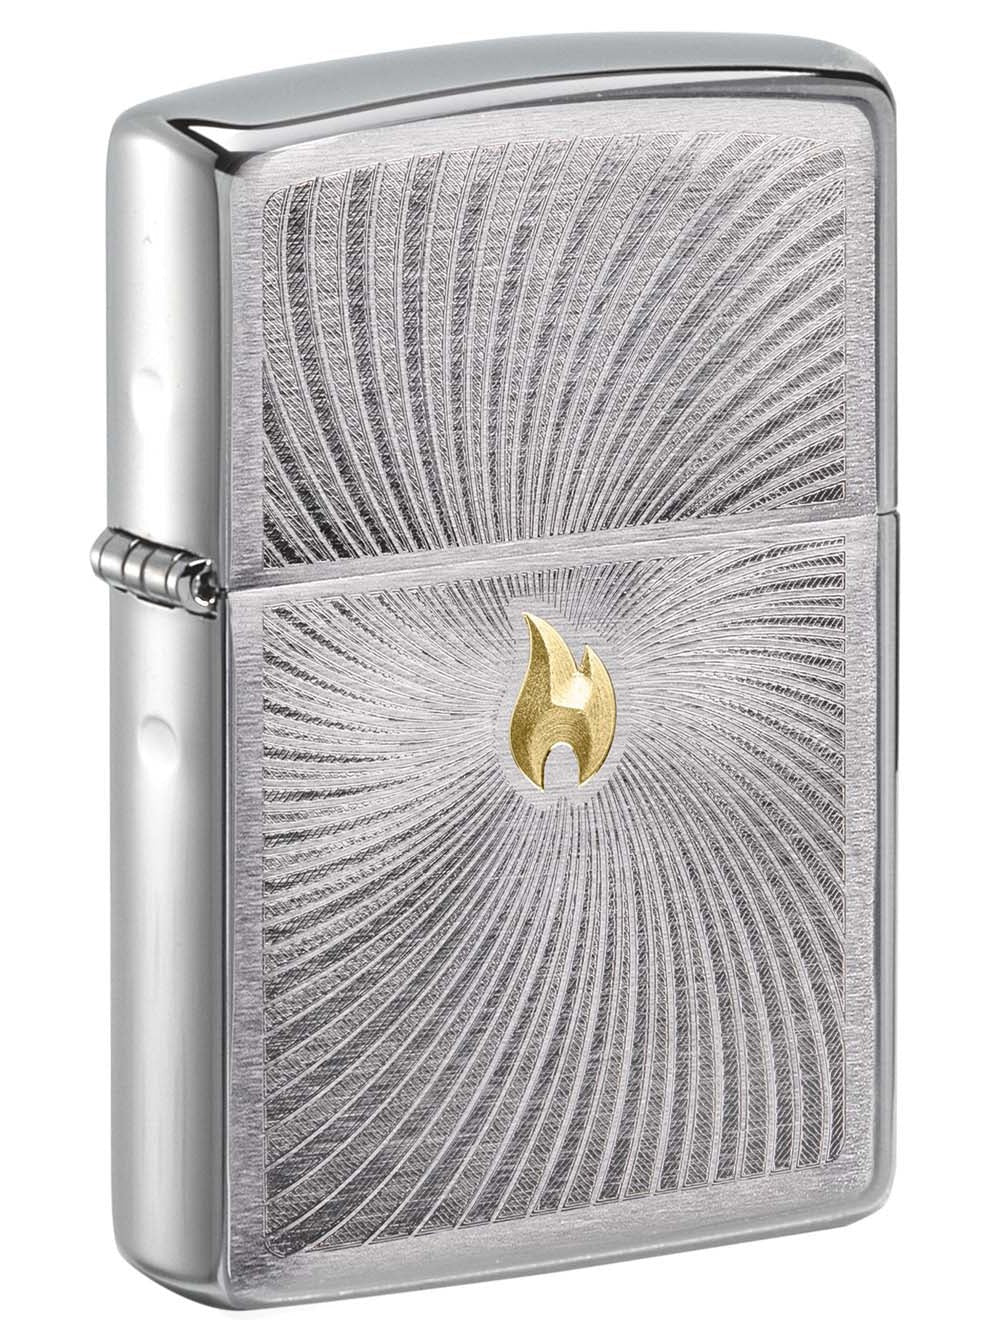 Zippo Lighter: Zippo Flame and Spiral, Engraved - Brushed Chrome 61002